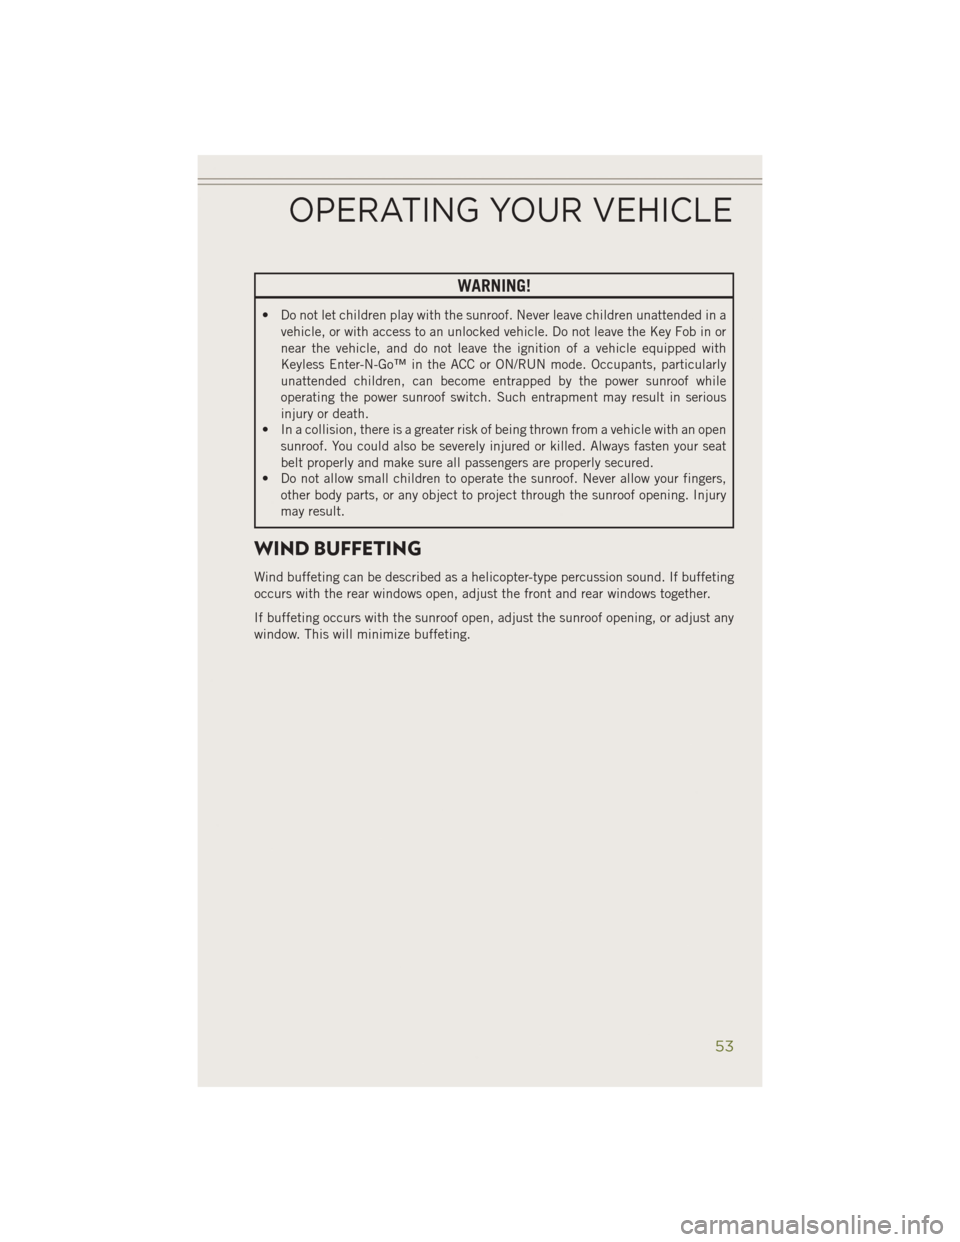 JEEP CHEROKEE 2014 KL / 5.G Workshop Manual WARNING!
• Do not let children play with the sunroof. Never leave children unattended in avehicle, or with access to an unlocked vehicle. Do not leave the Key Fob in or
near the vehicle, and do not 